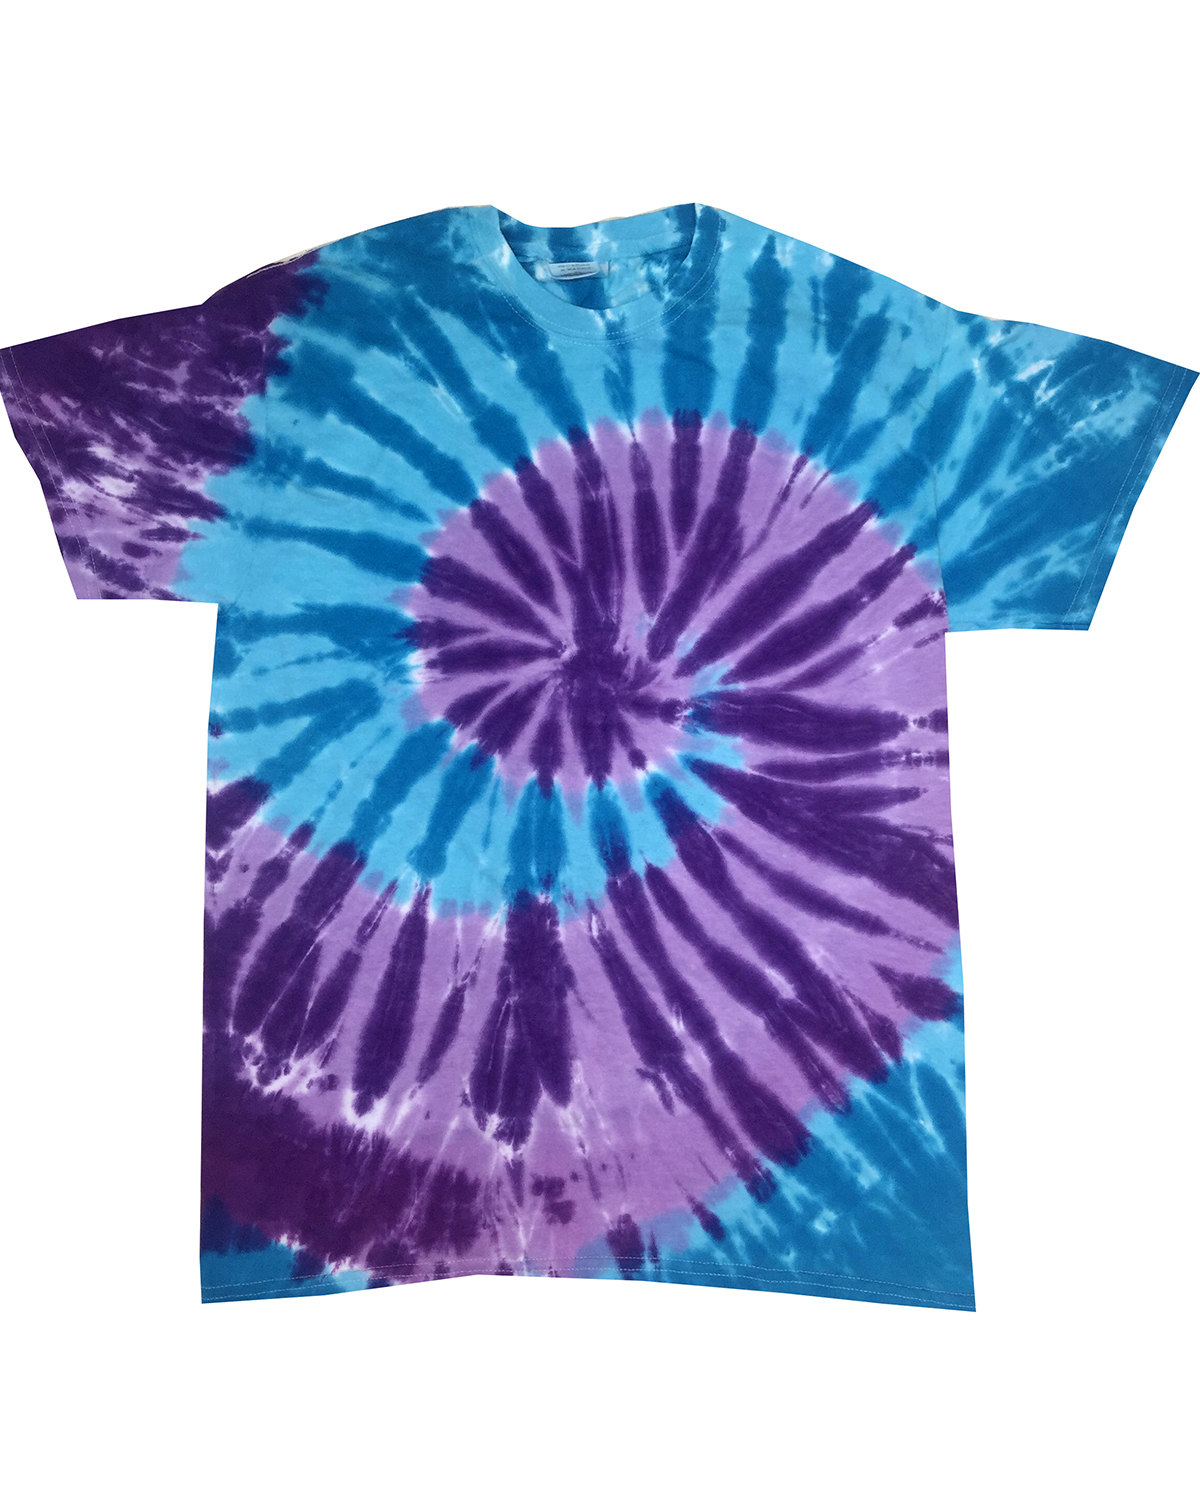 Tie-Dyed CD1180B - Youth Island Collection Tie-Dyed Tee $7.97 - T-Shirts